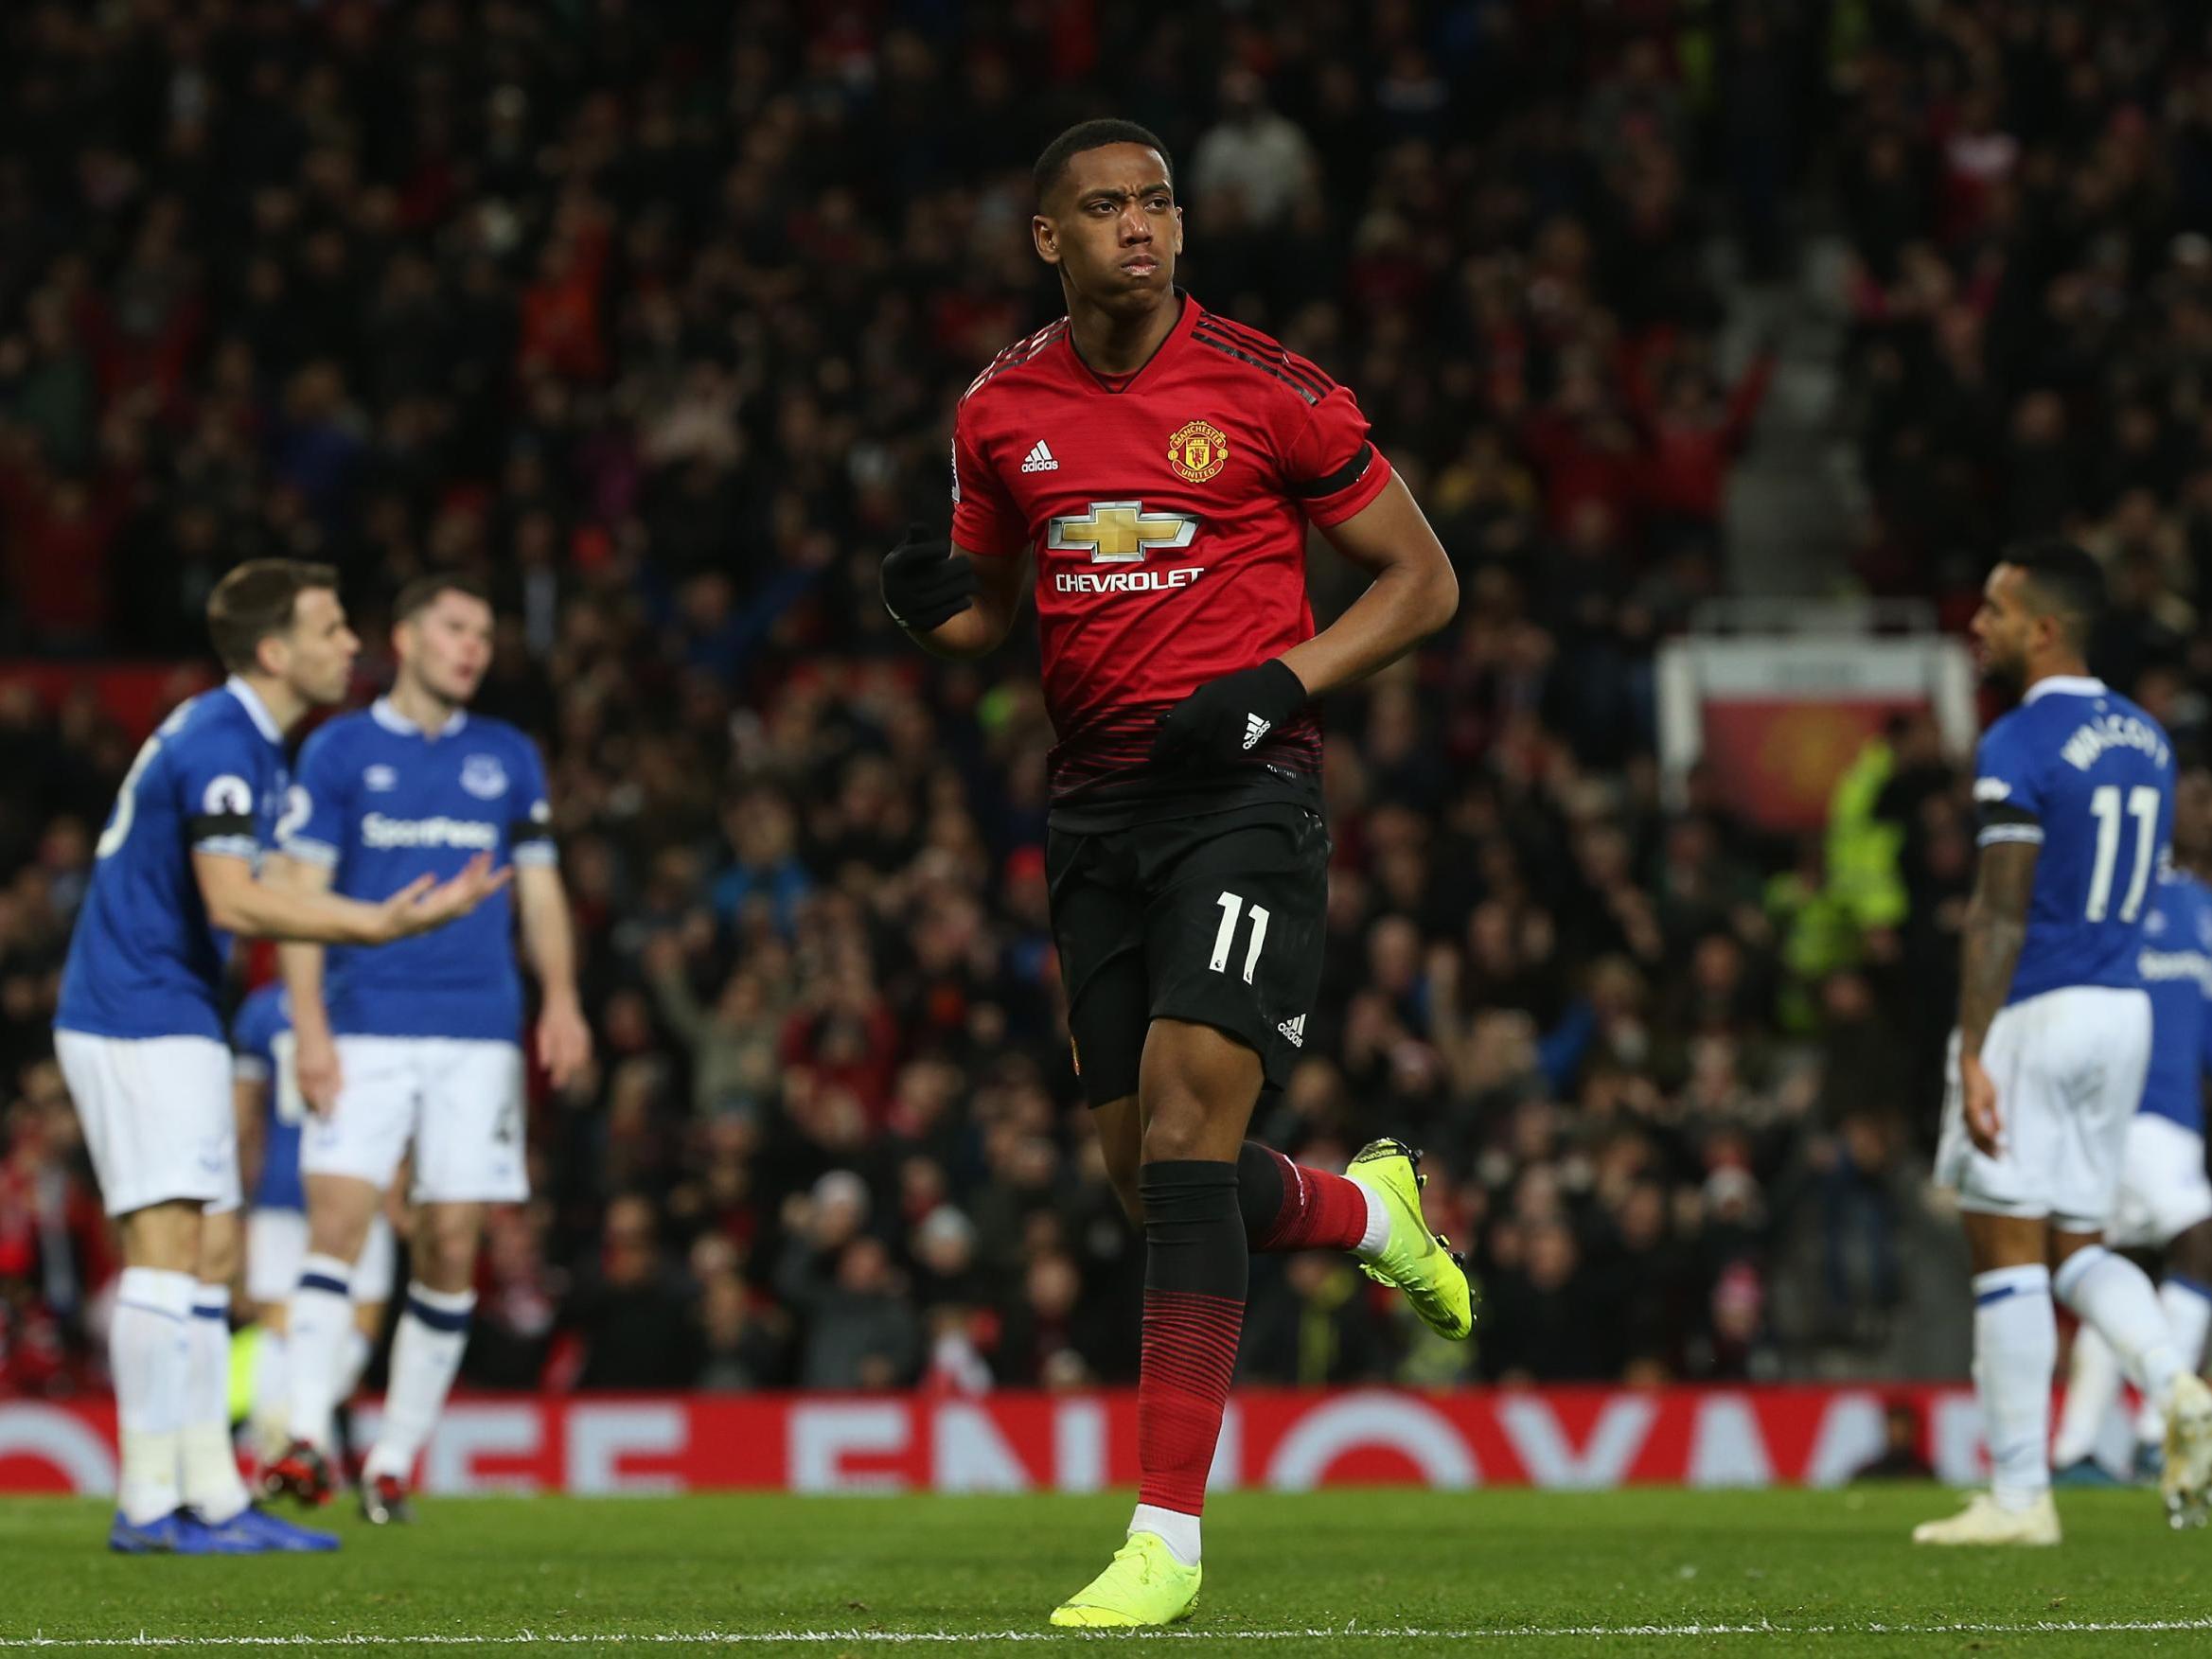 Martial doubled the hosts' lead with a sublime strike